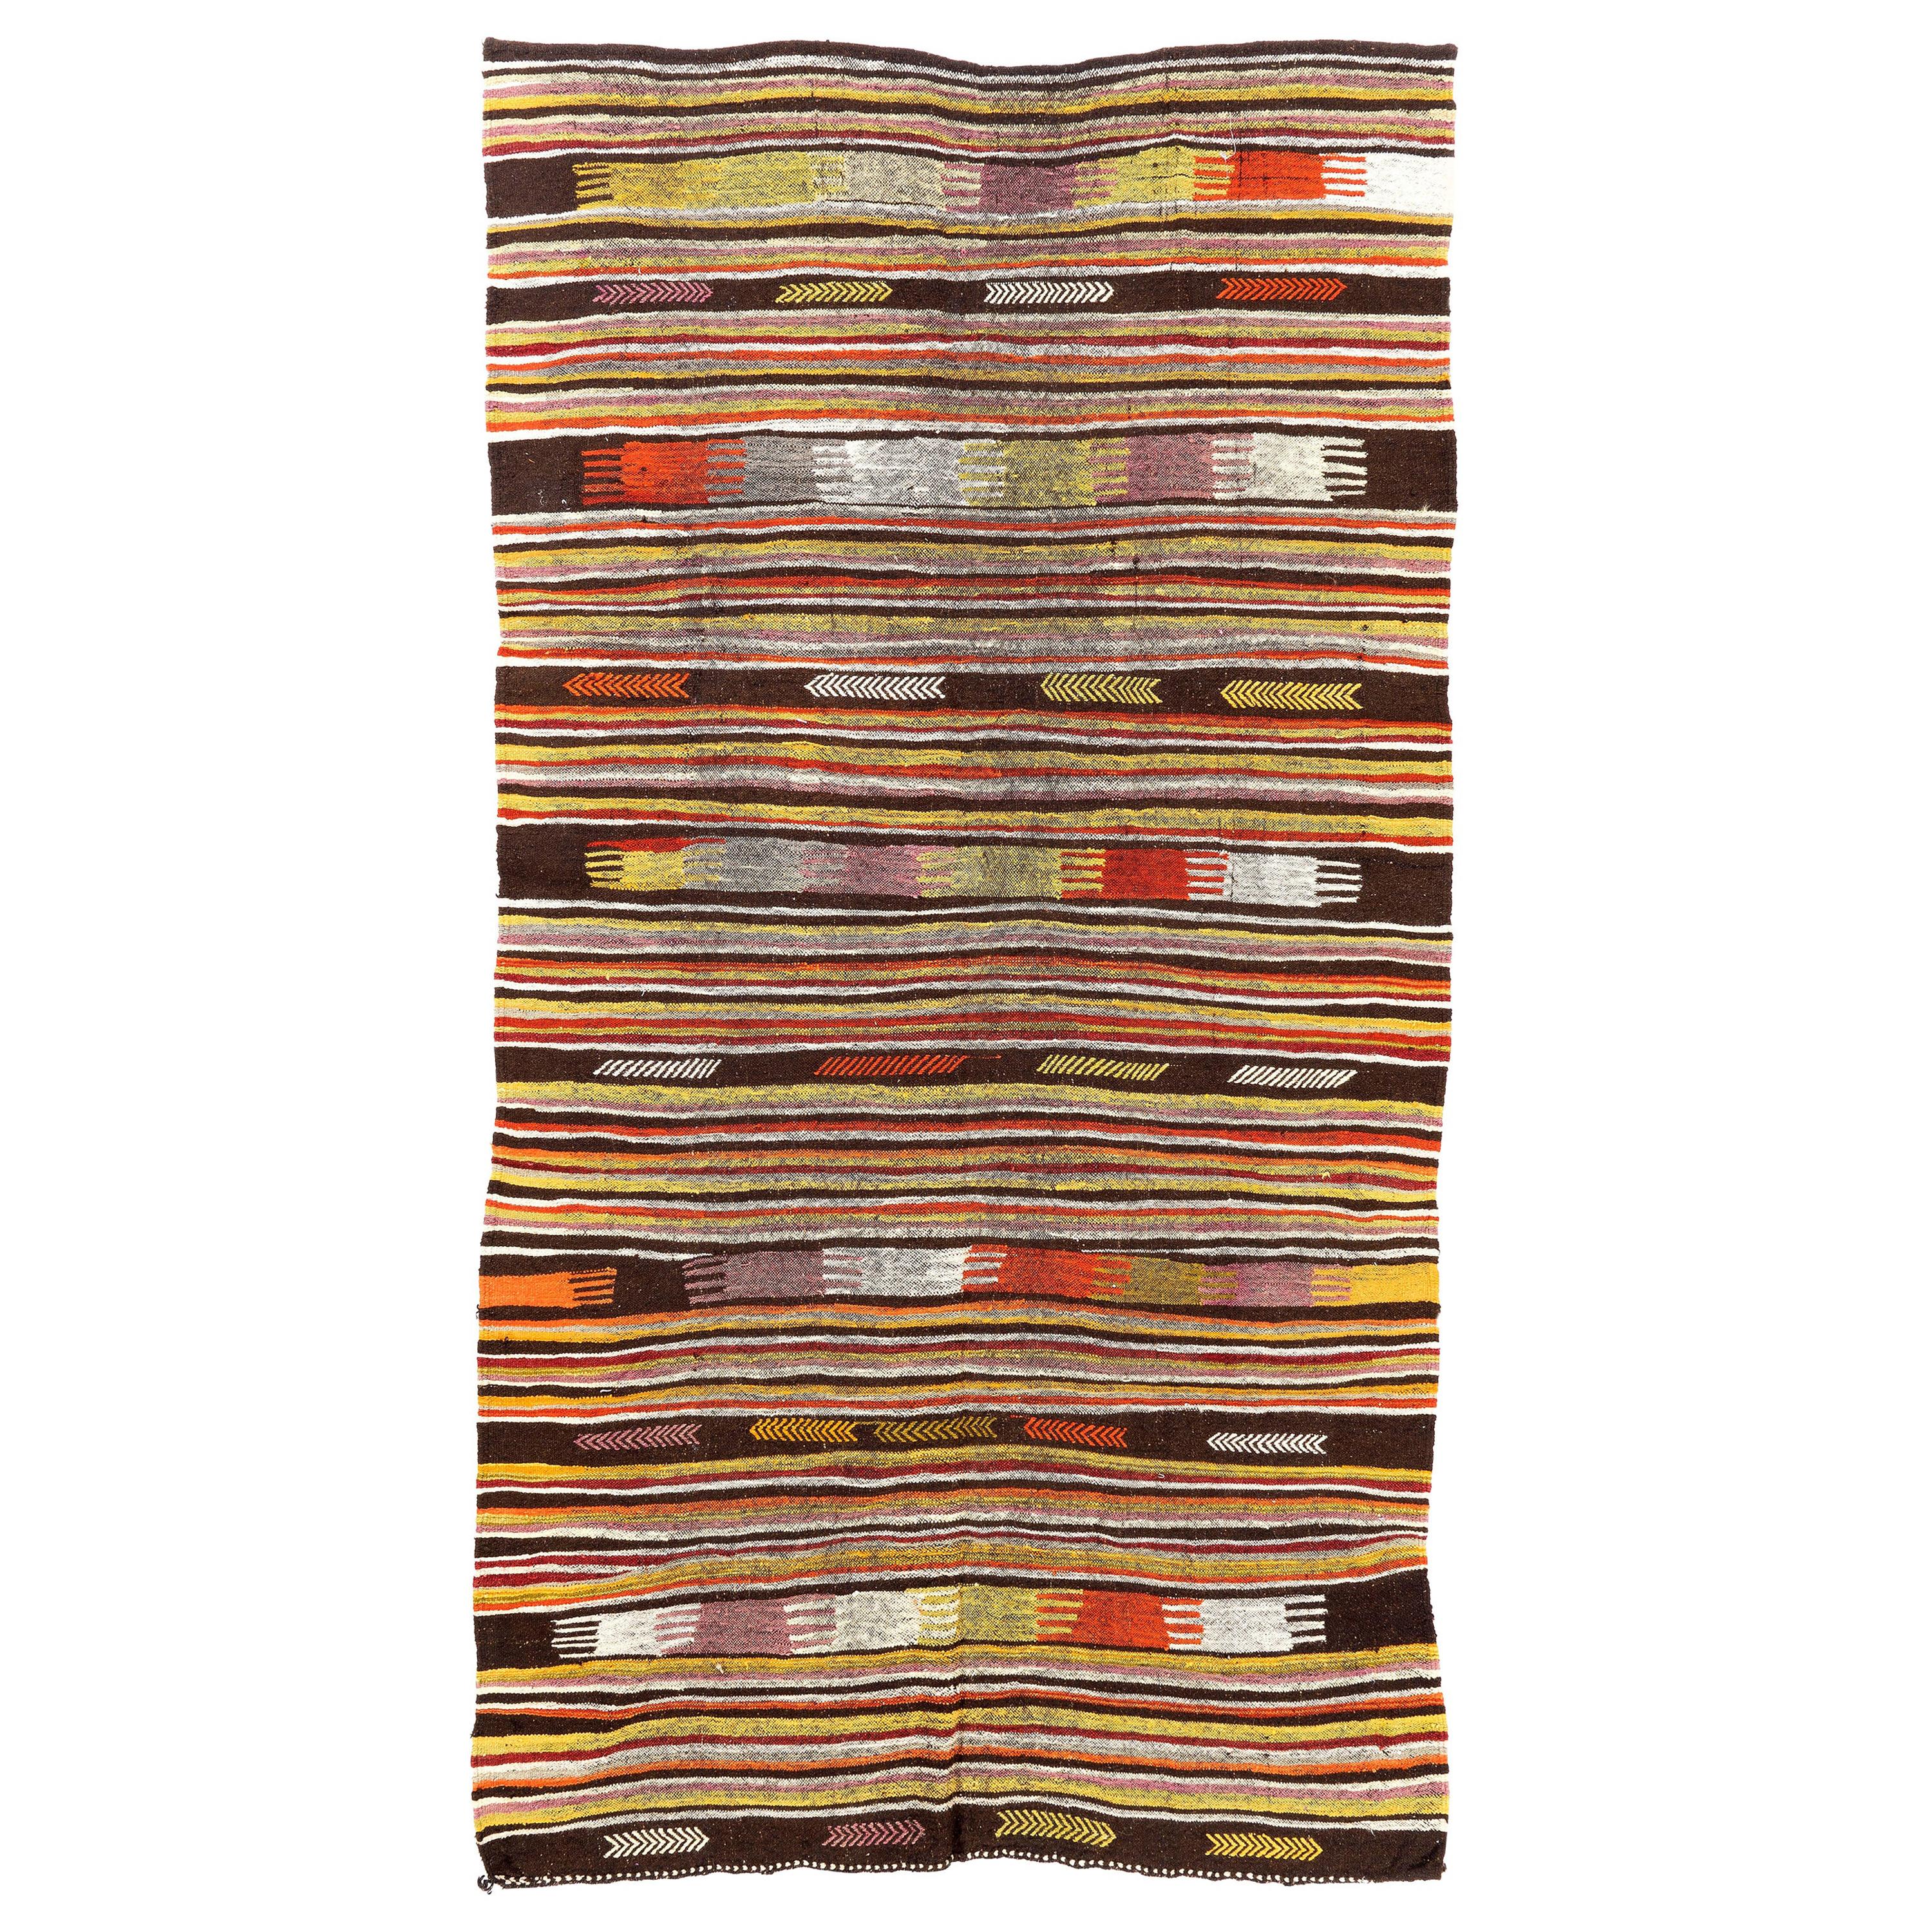 5.3x10 Ft Colorful Nomadic Vintage Hand-Woven Anatolian Kilim Rug, 100% Wool For Sale